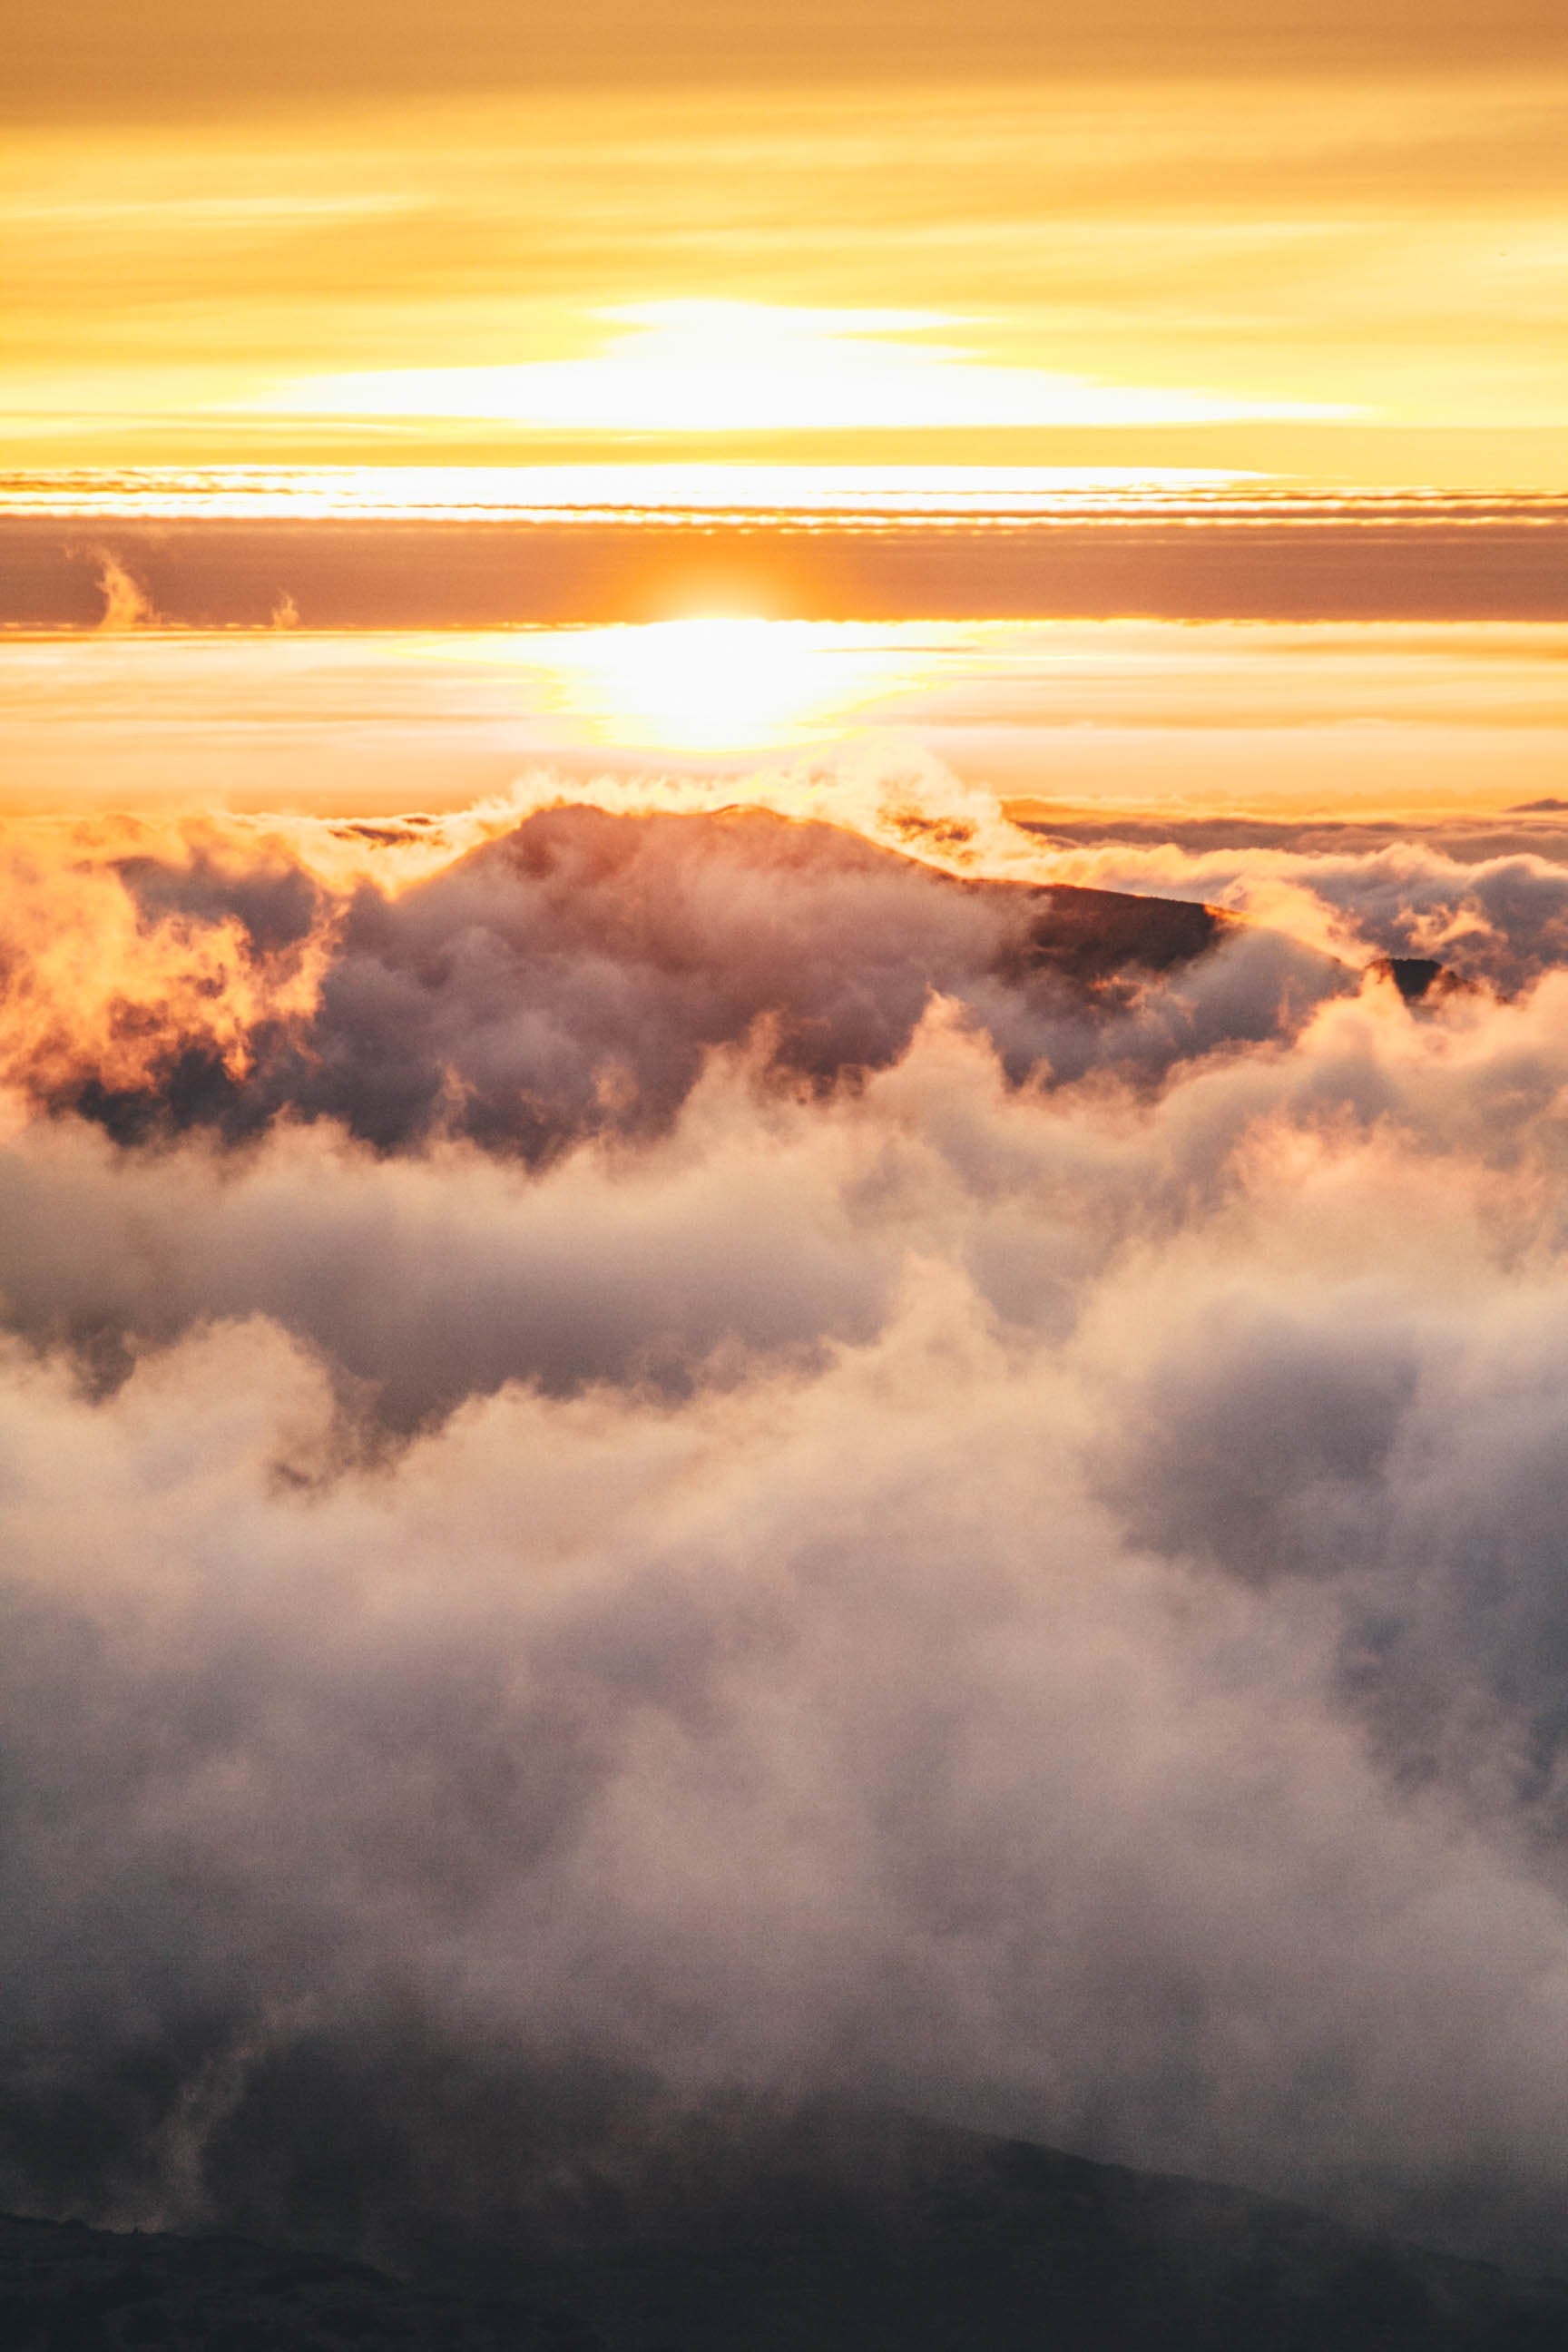 A photo of a sunrise over a majestic mountain range shrouded in clouds.